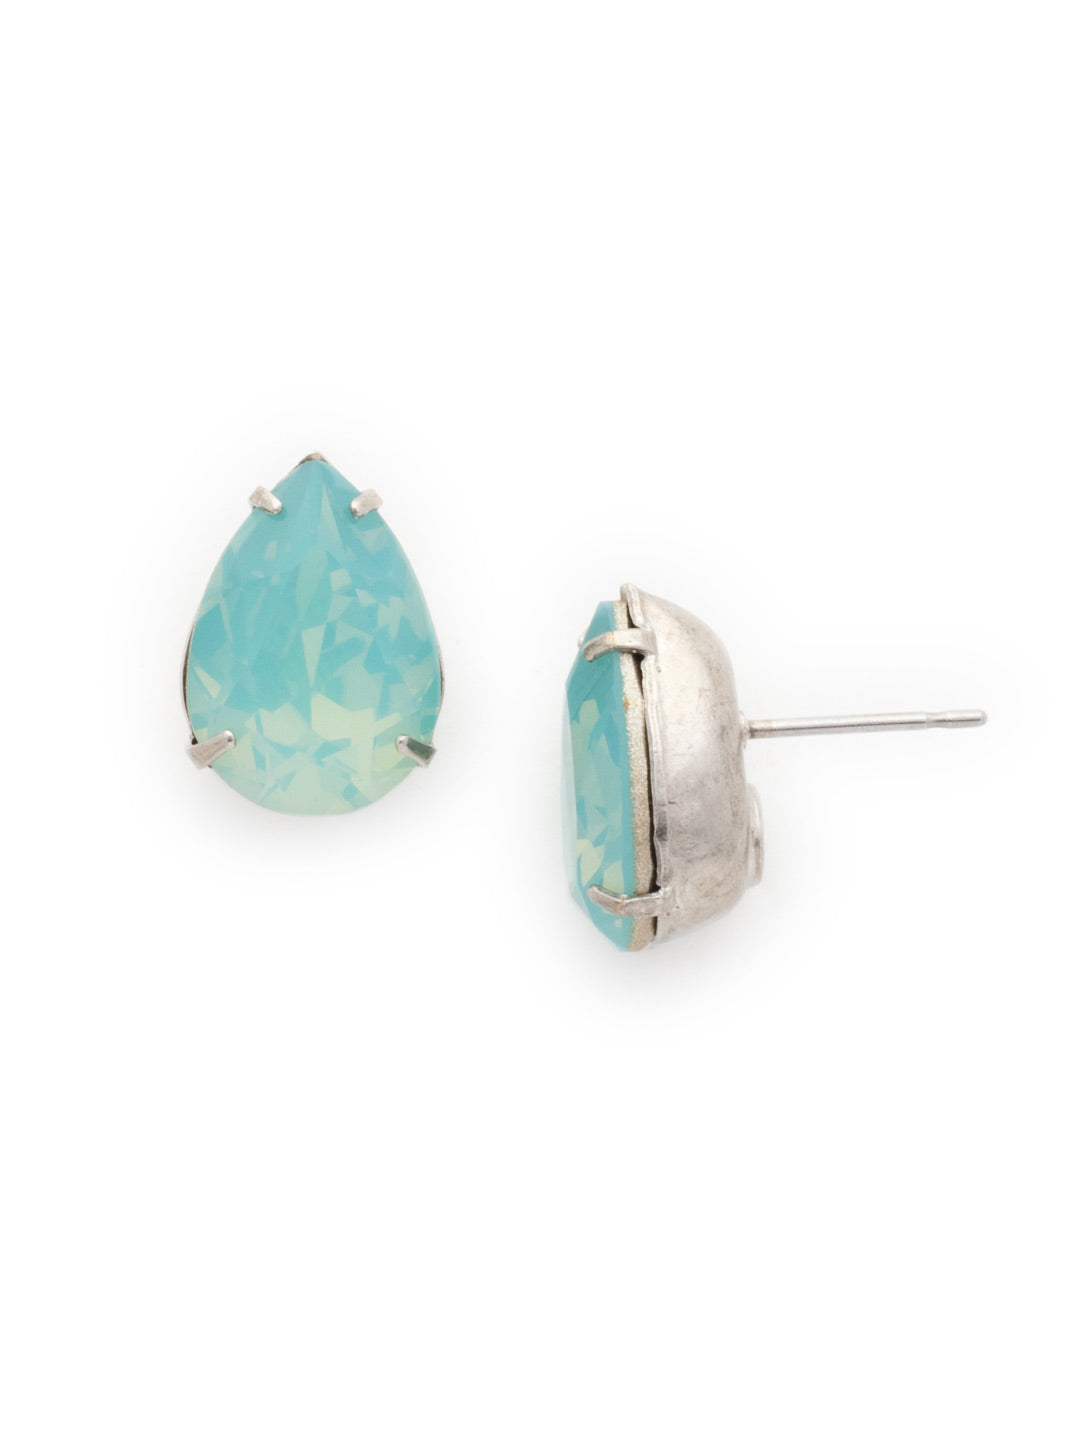 Ginnie Stud Earrings - ECR115ASAES - <p>A beautiful basic stud. These classic single teardrop post earrings are perfect for any occasion, especially the everyday look. A timeless treasure that will sparkle season after season. From Sorrelli's Aegean Sea collection in our Antique Silver-tone finish.</p>